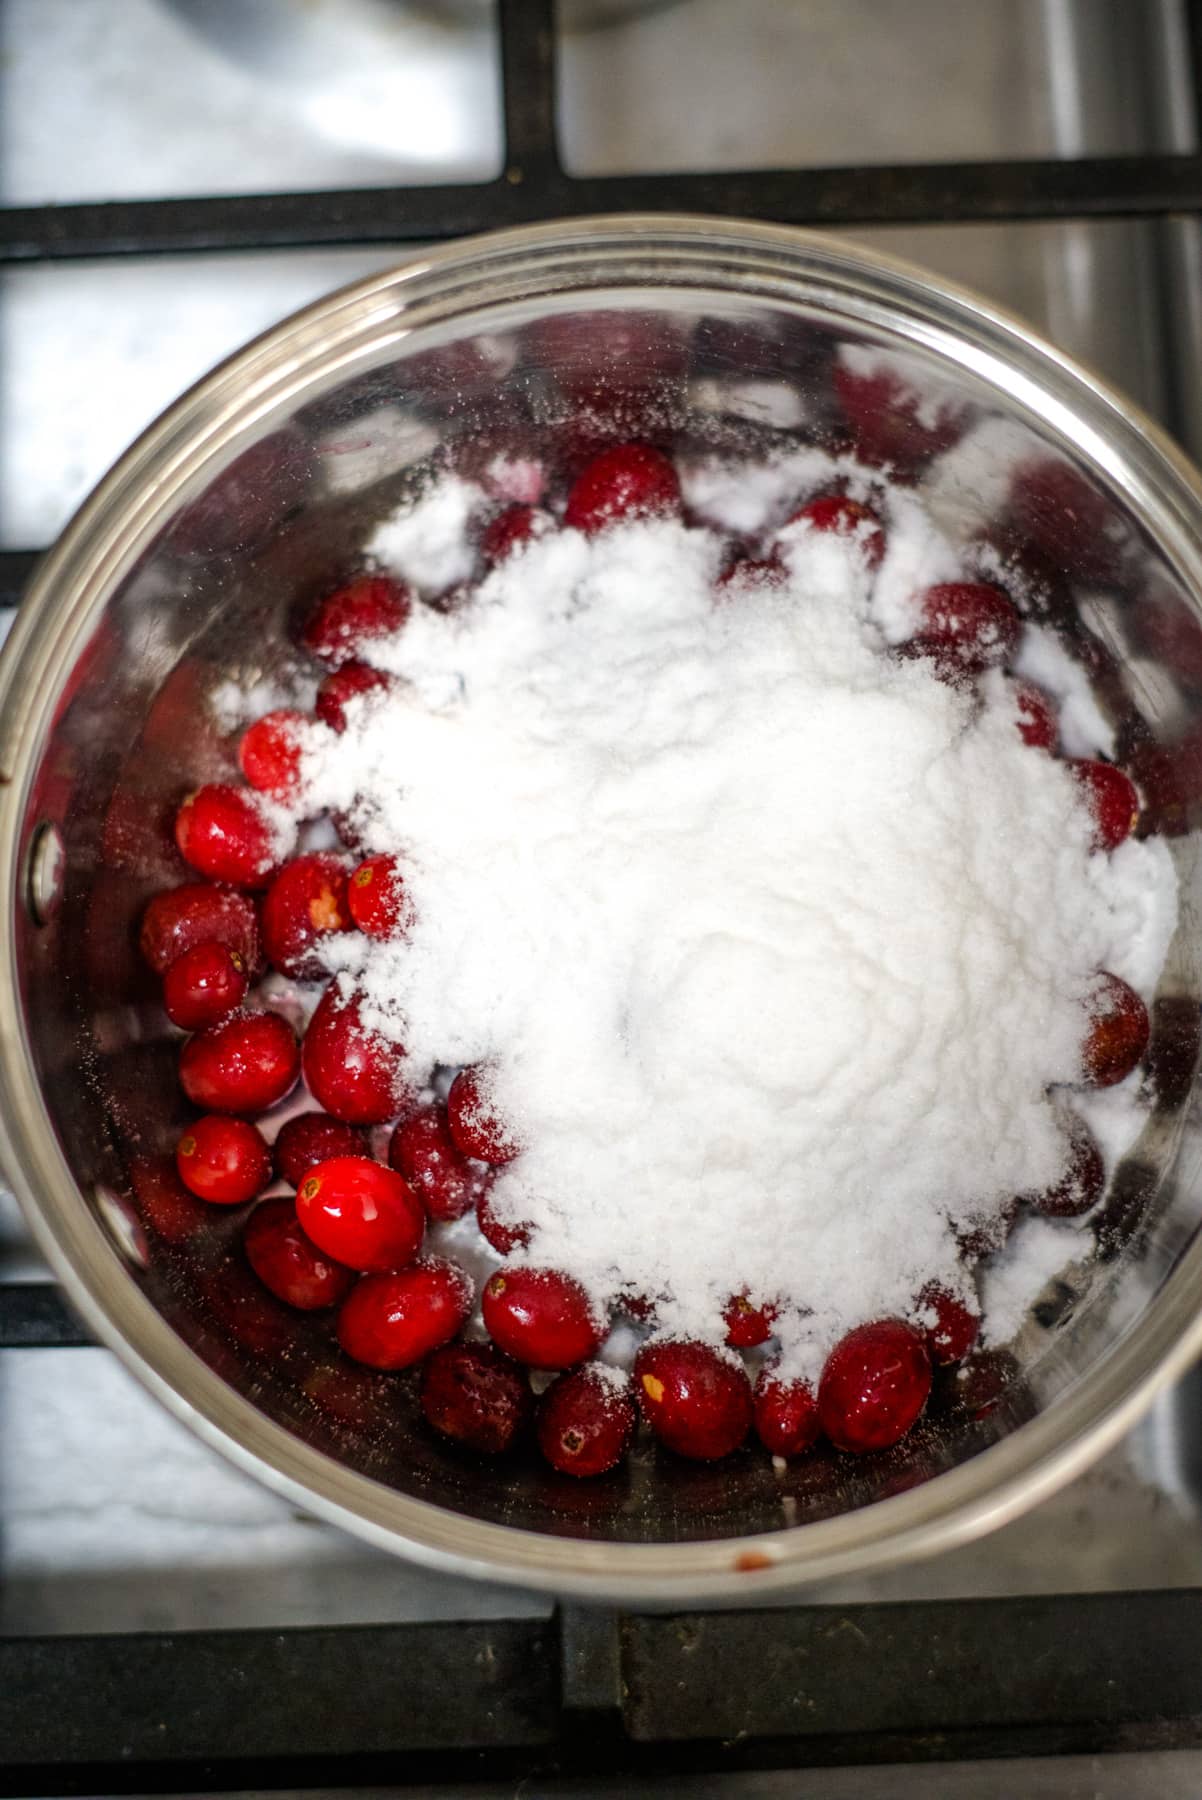 Cranberries in a bowl on top of the stove.